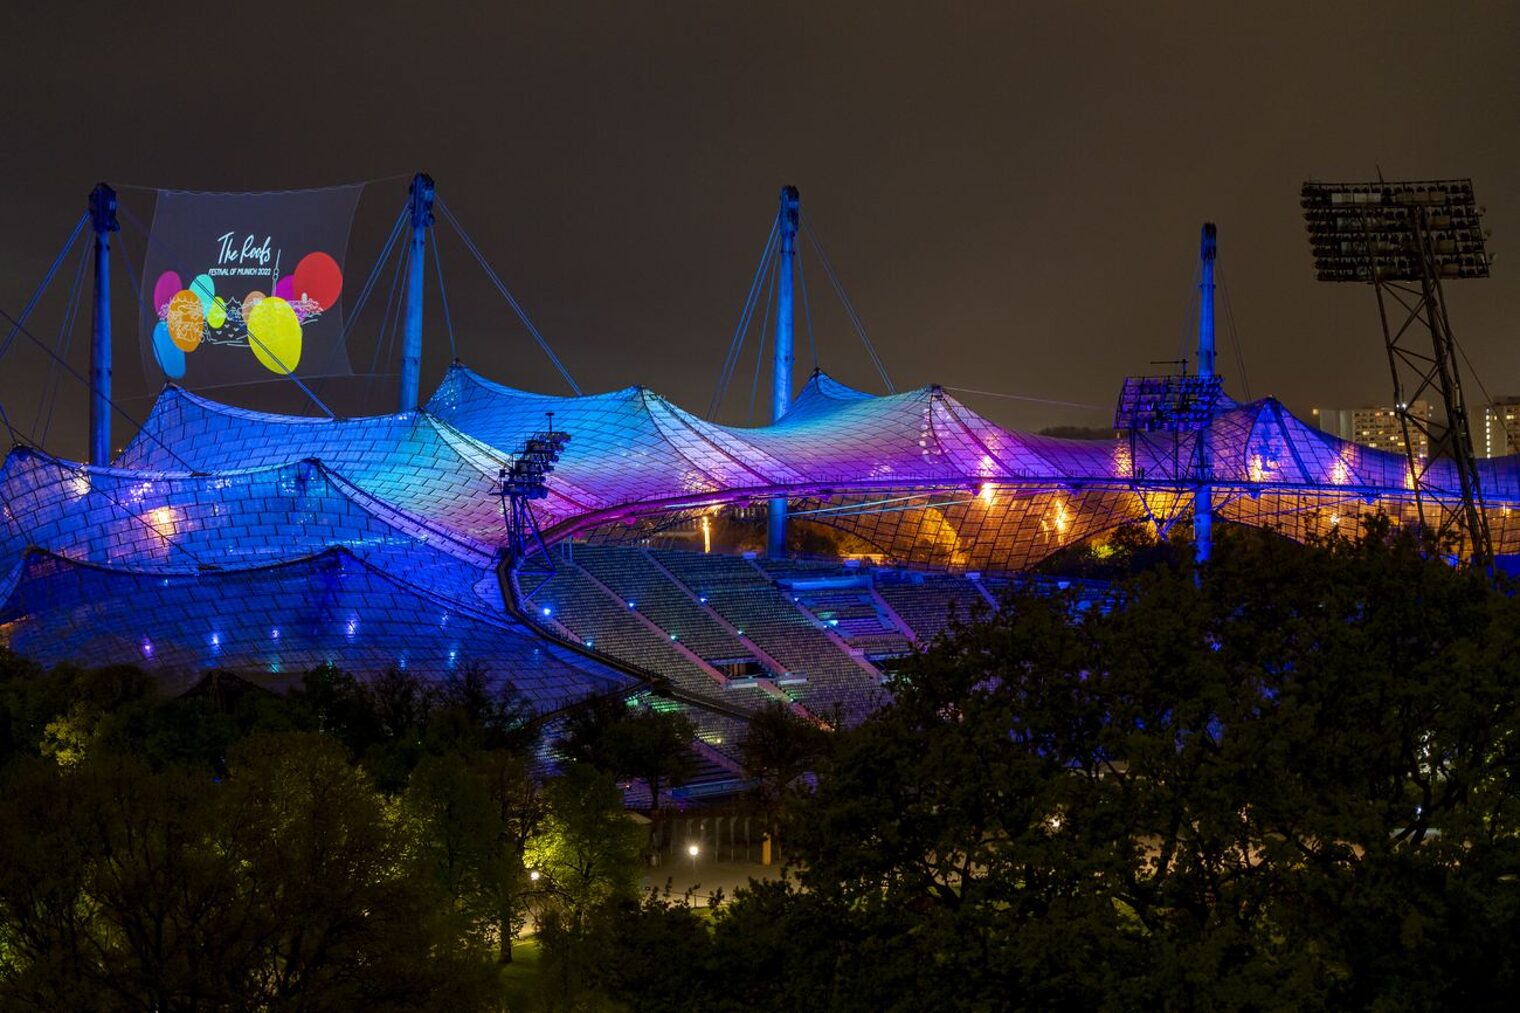 A light installation is on display in the Olympiapark in Munich on Monday (02.05.2022) to mark the 100-day countdown start. Foto: Marc Müller / Munich2022 Schlagwort(e): munich2022, ec2022, lichtinstallation, 100 days to go, countdown, oly